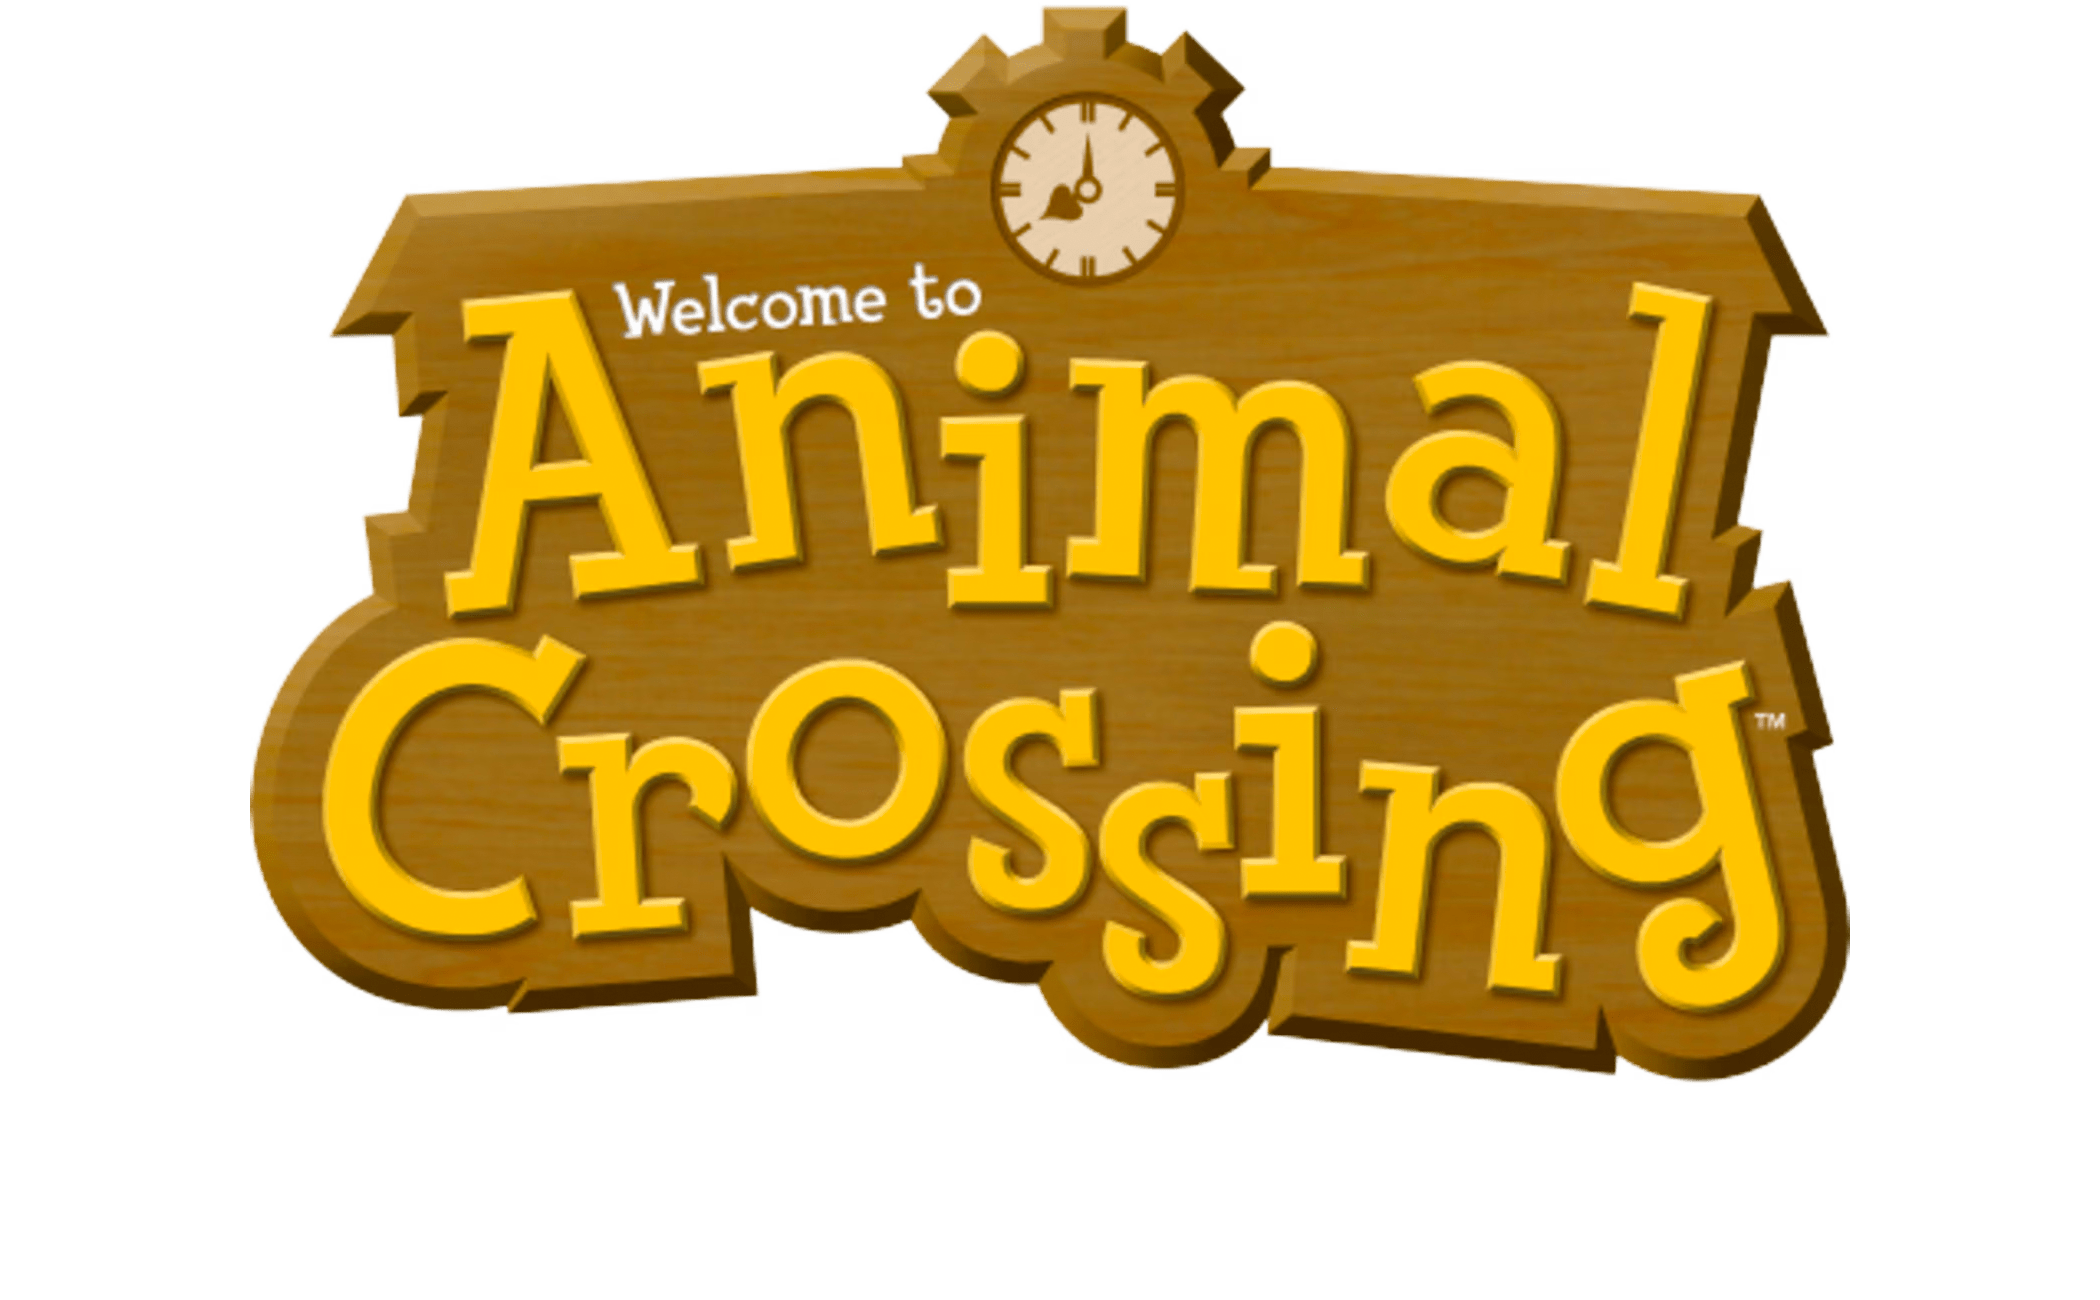 Welcome to Animal Crossing logo